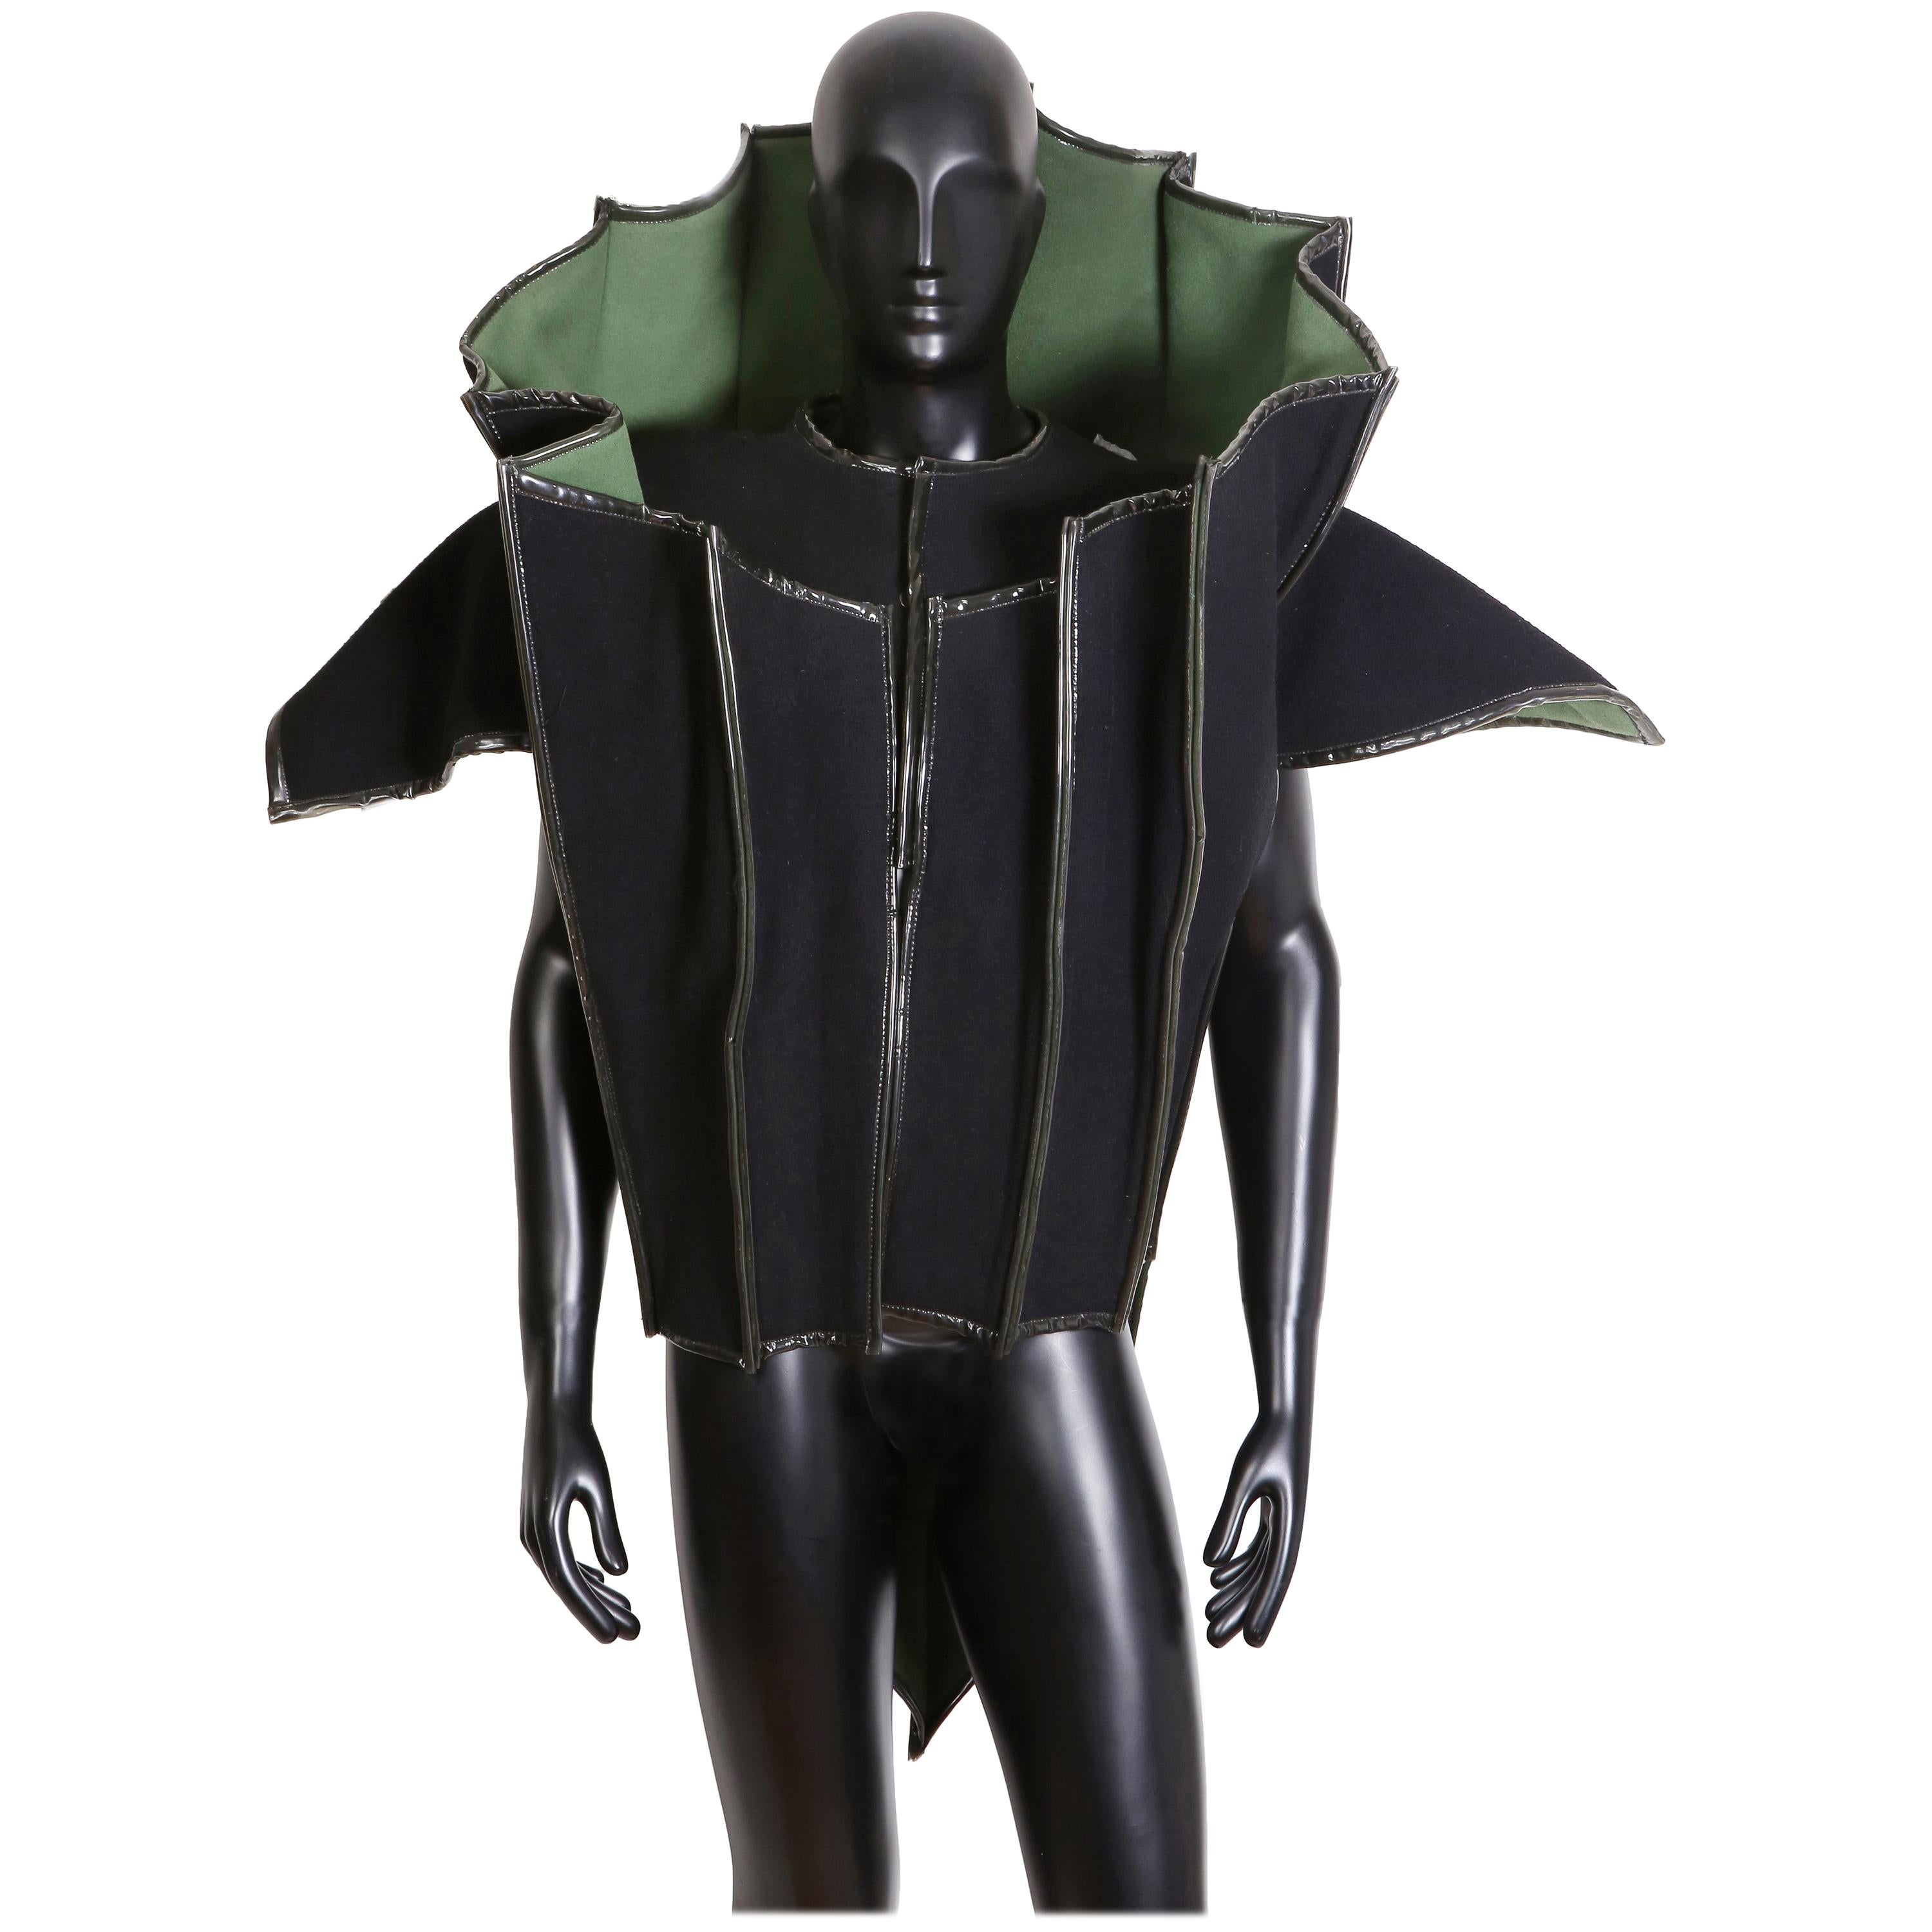 Paco Rabanne Couture Black and Green Architectural and Structured Jacket